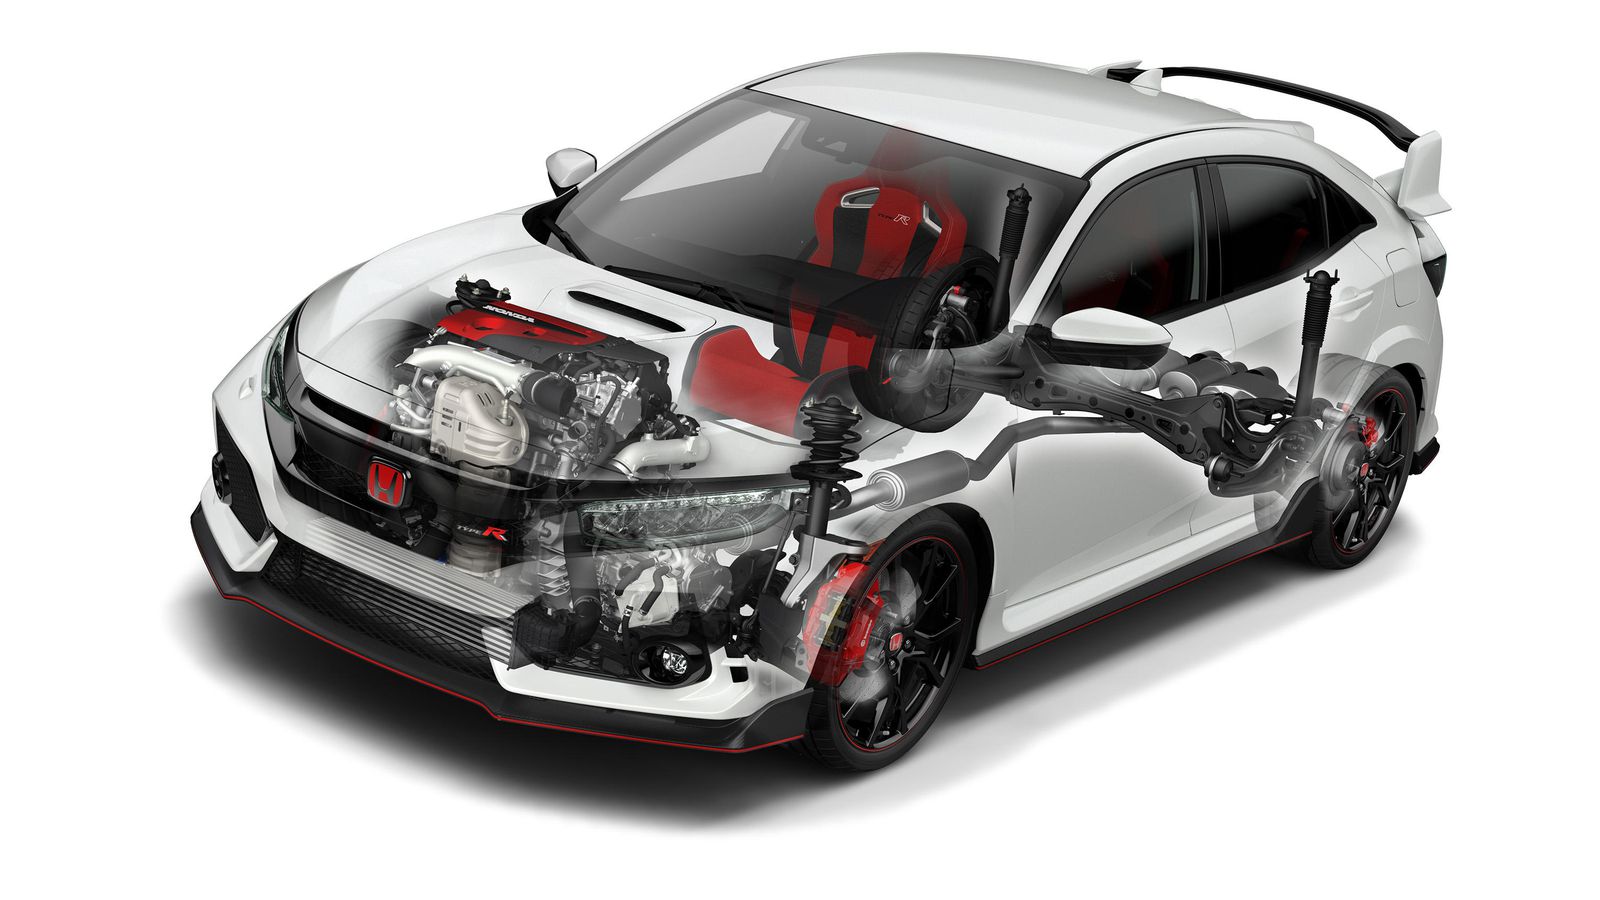 Honda Civic Type R Picks Up New Gray Paint More Physical